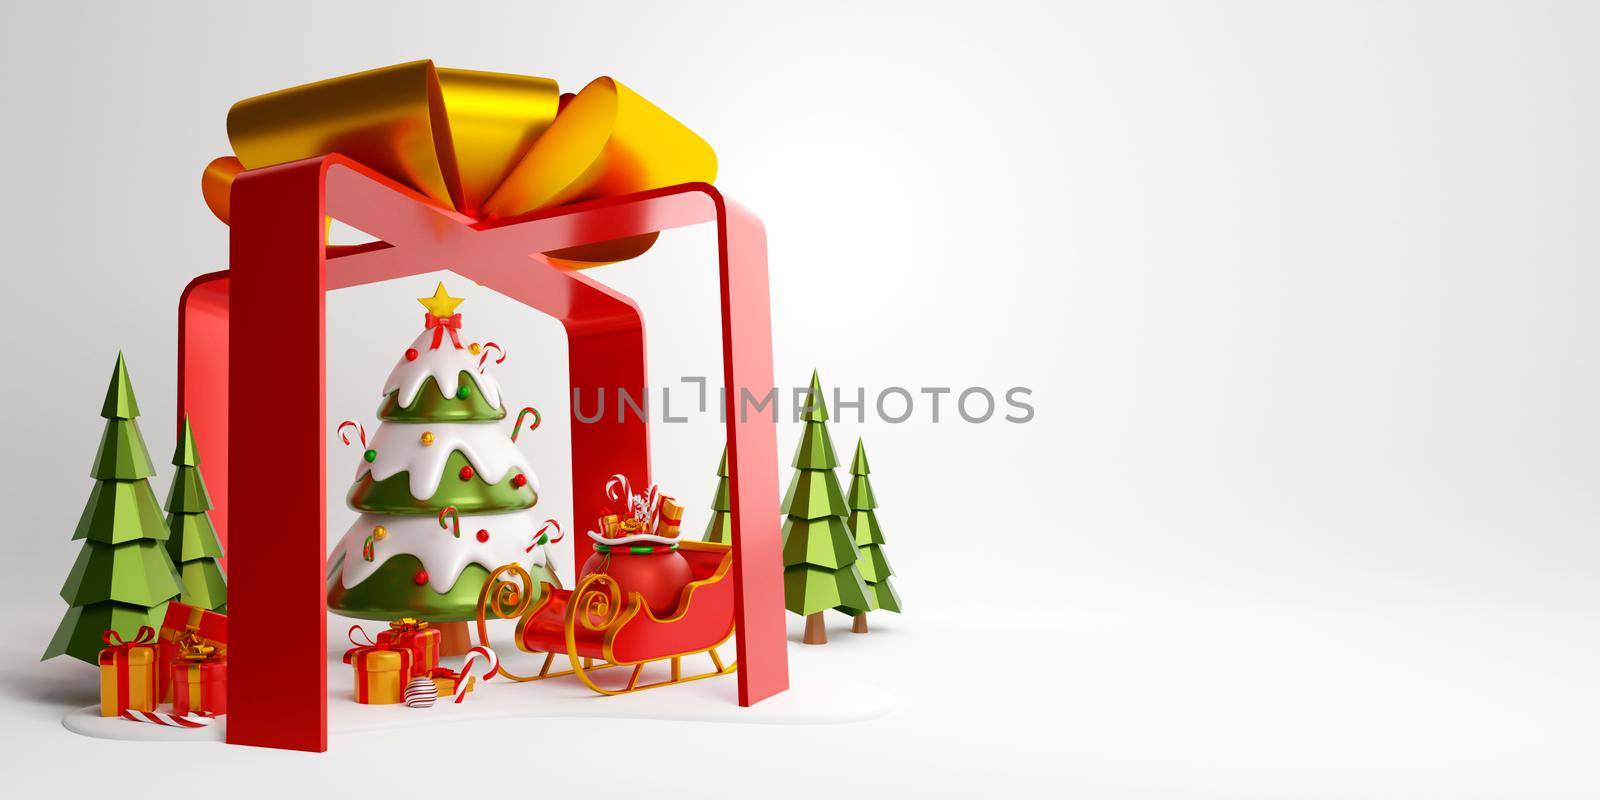 Christmas banner of Christmas tree, sleigh and gift box within big gift box, 3d illustration by nutzchotwarut